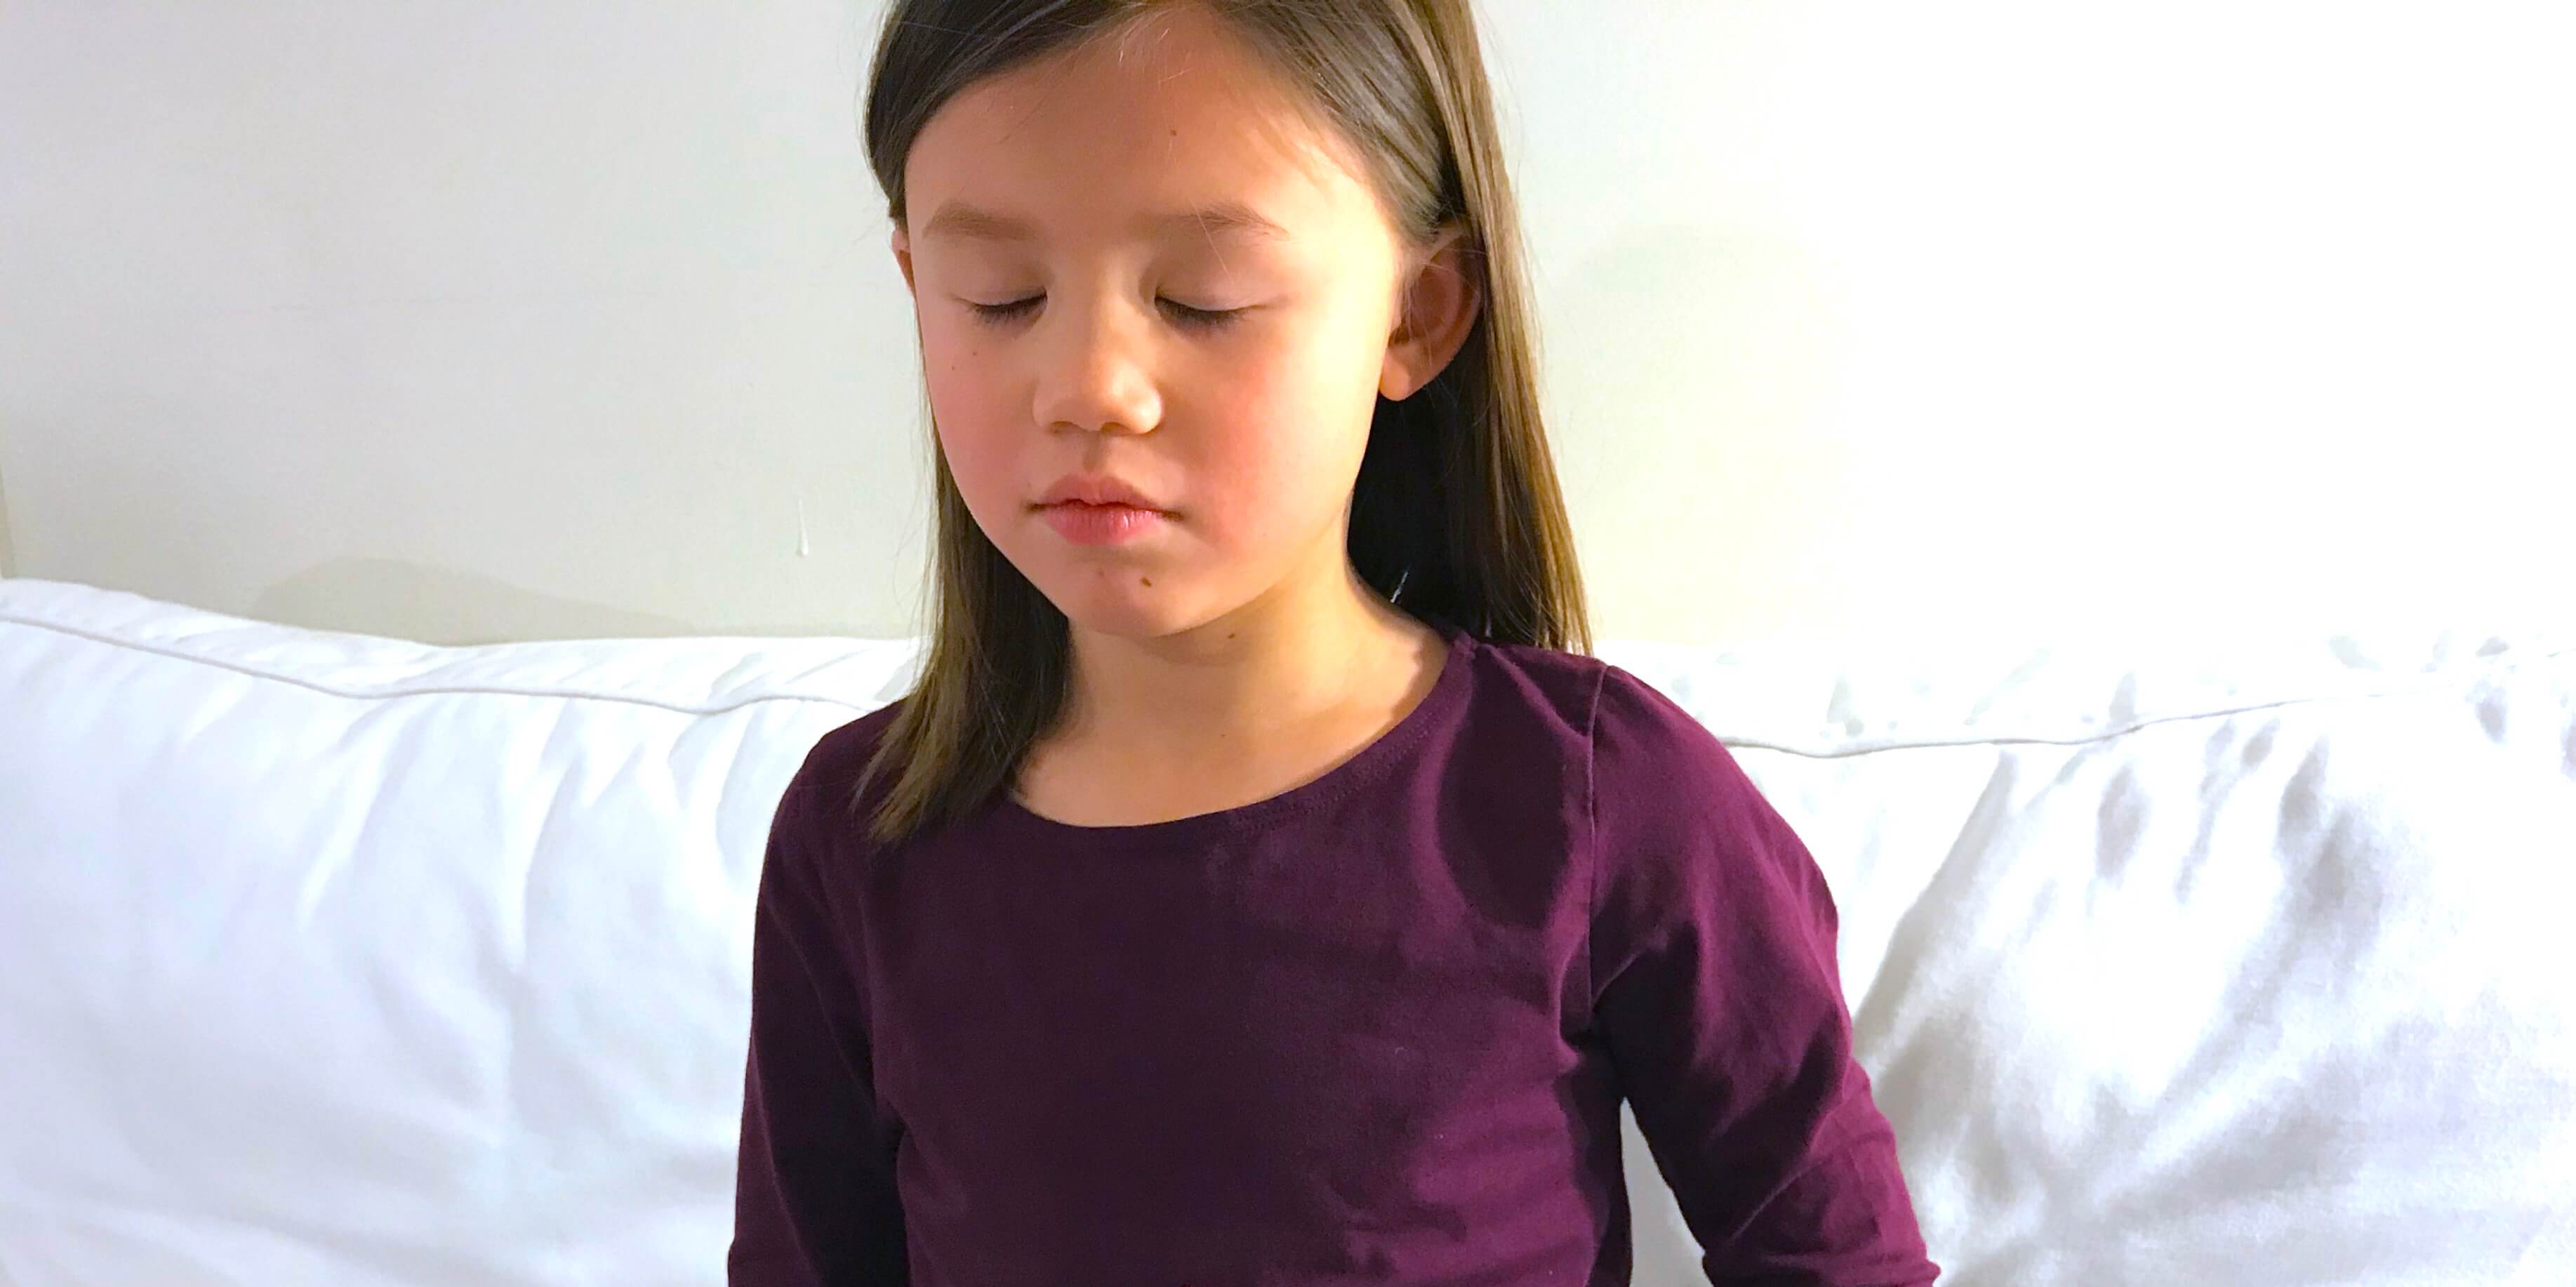 Two Bellies, Two Hands, Two Breaths - Mindful Schools